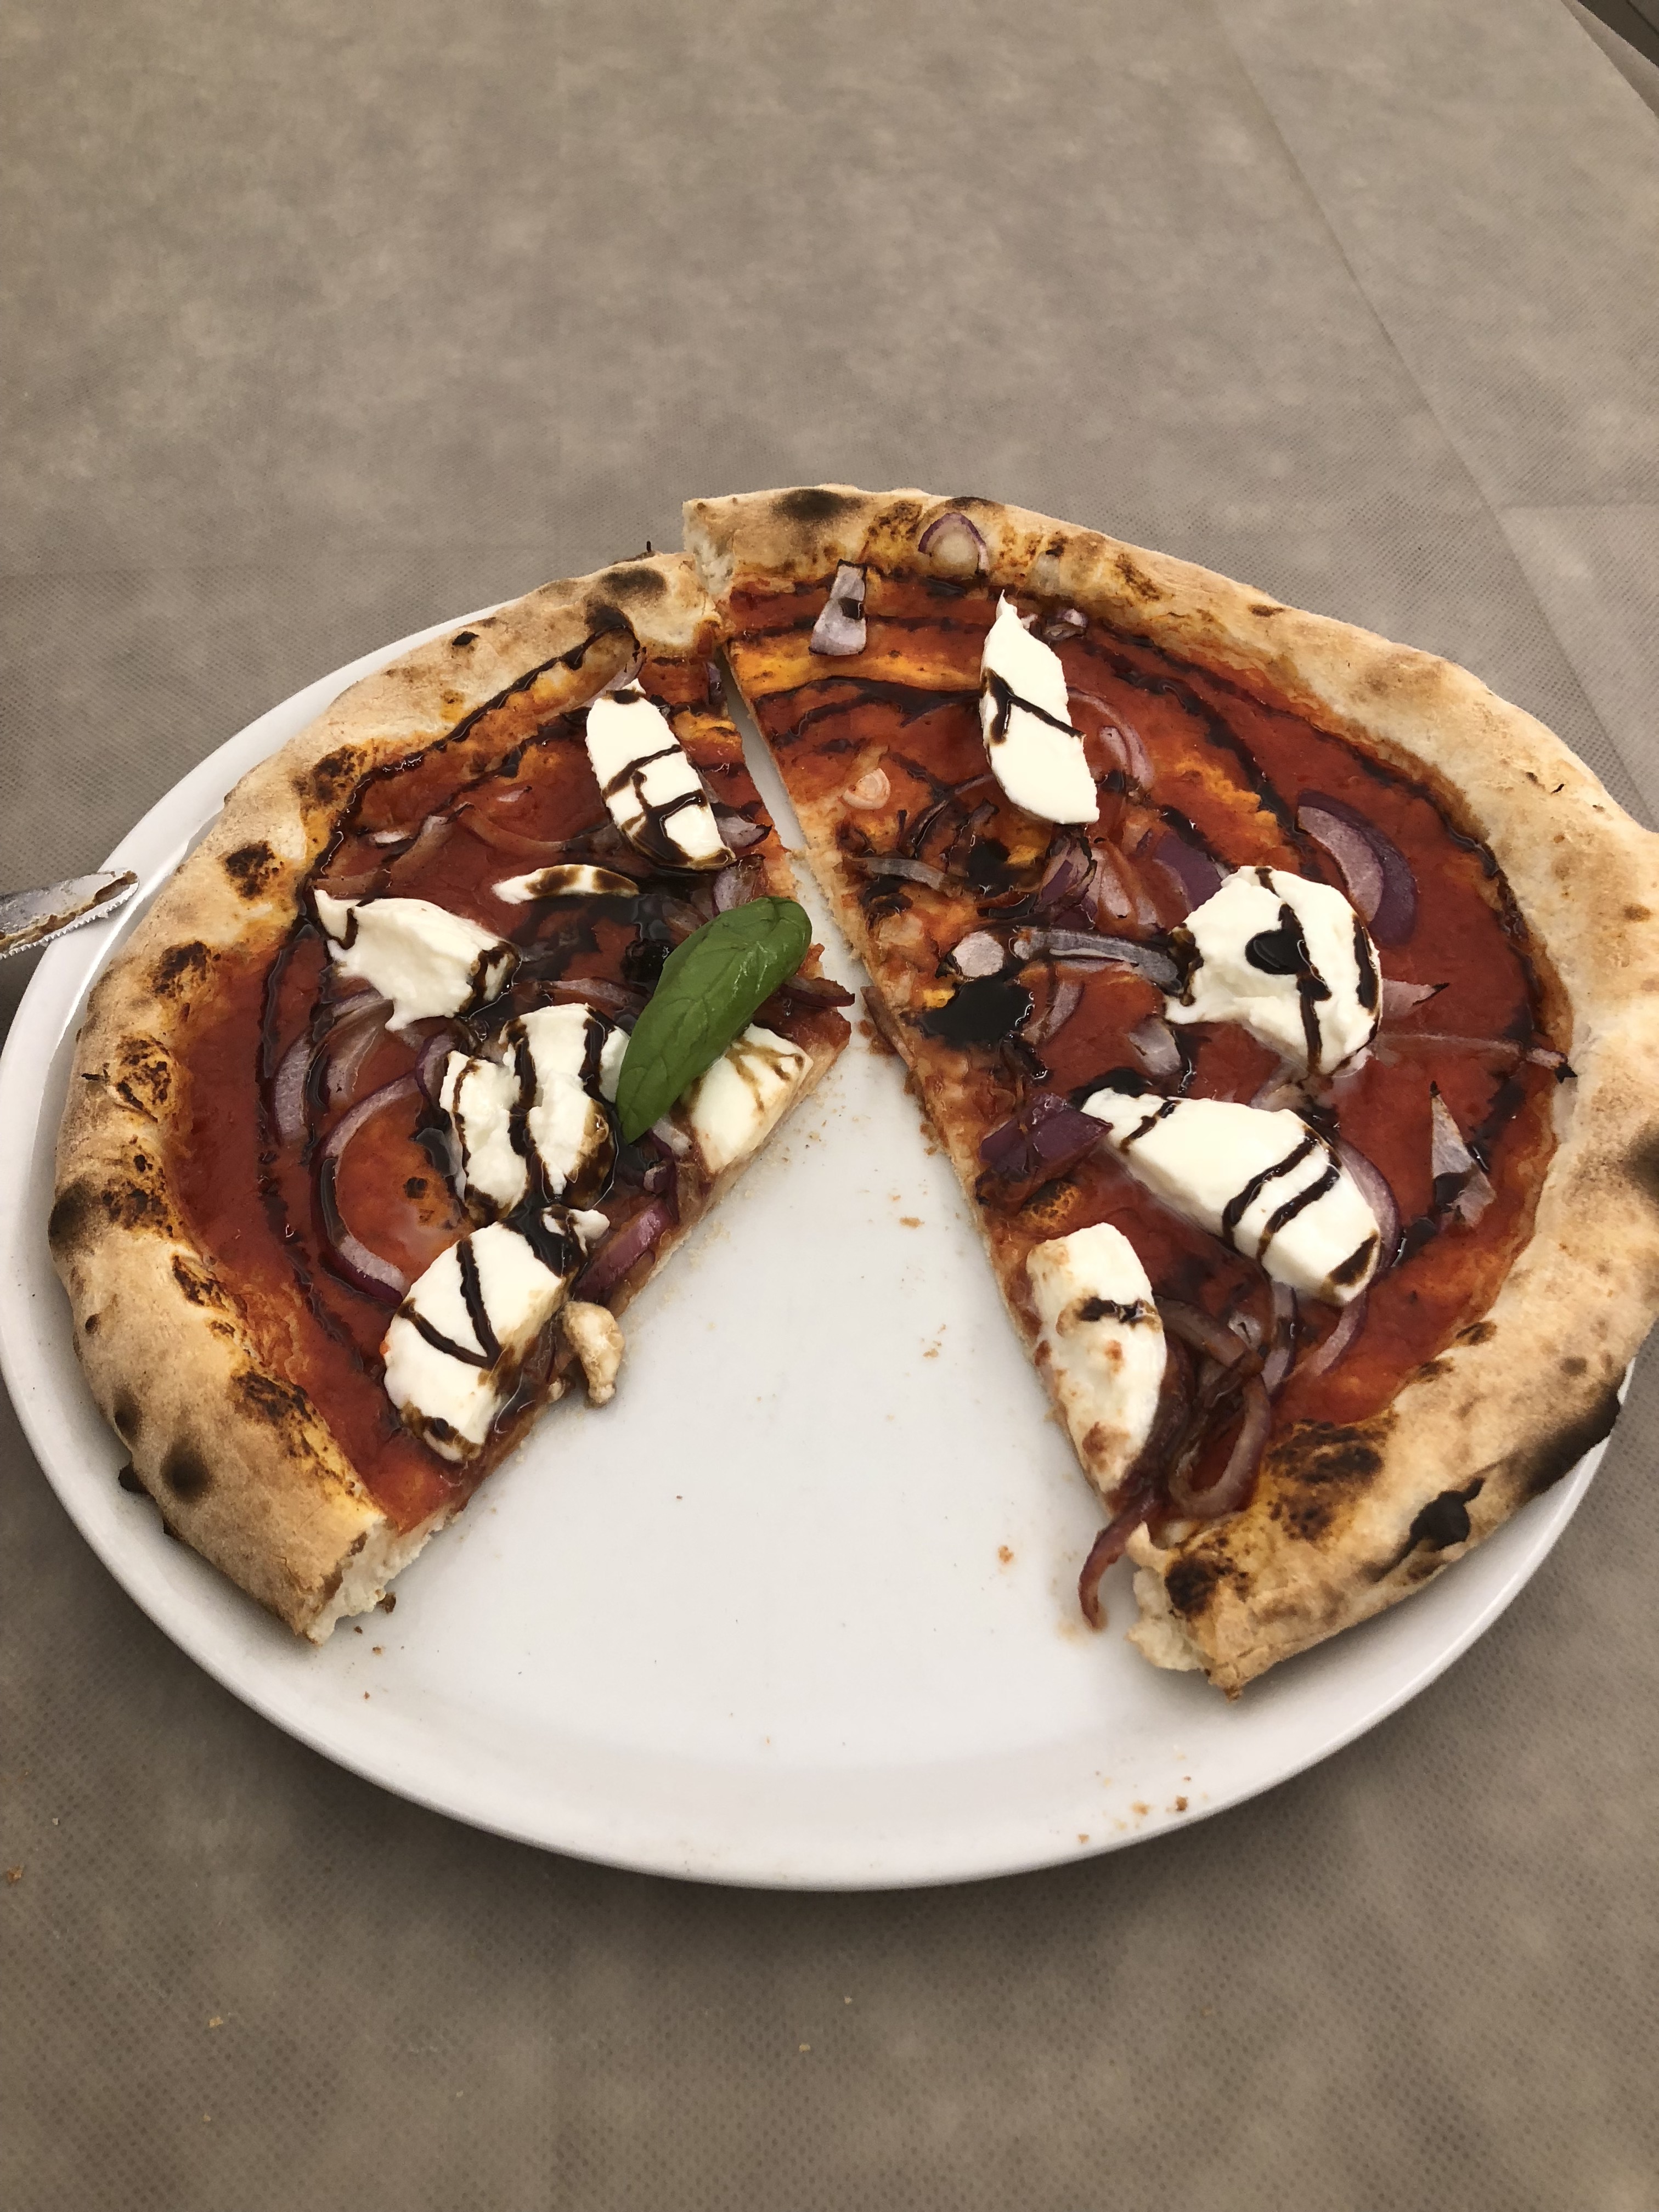 A pizza with fresh mozzarella drizzled with a reduced balsamic vinegar.  One slice is missing.